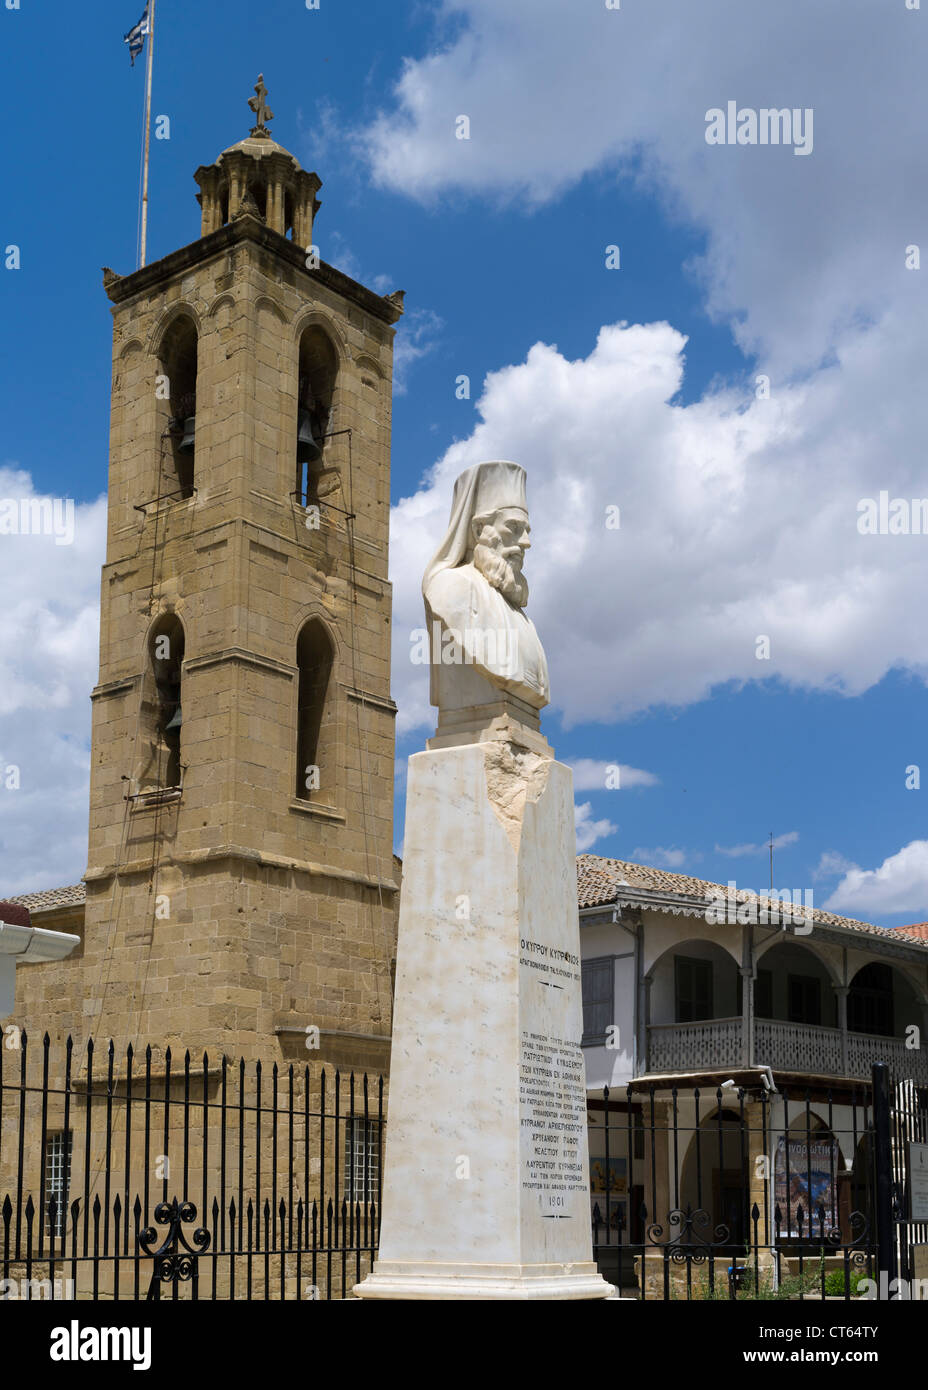 dh Old town Lefkosia NICOSIA CYPRUS Archbishop Kyprianos bust statue Greek War of Independence 1821 agios saint johns cathedral greece south Stock Photo